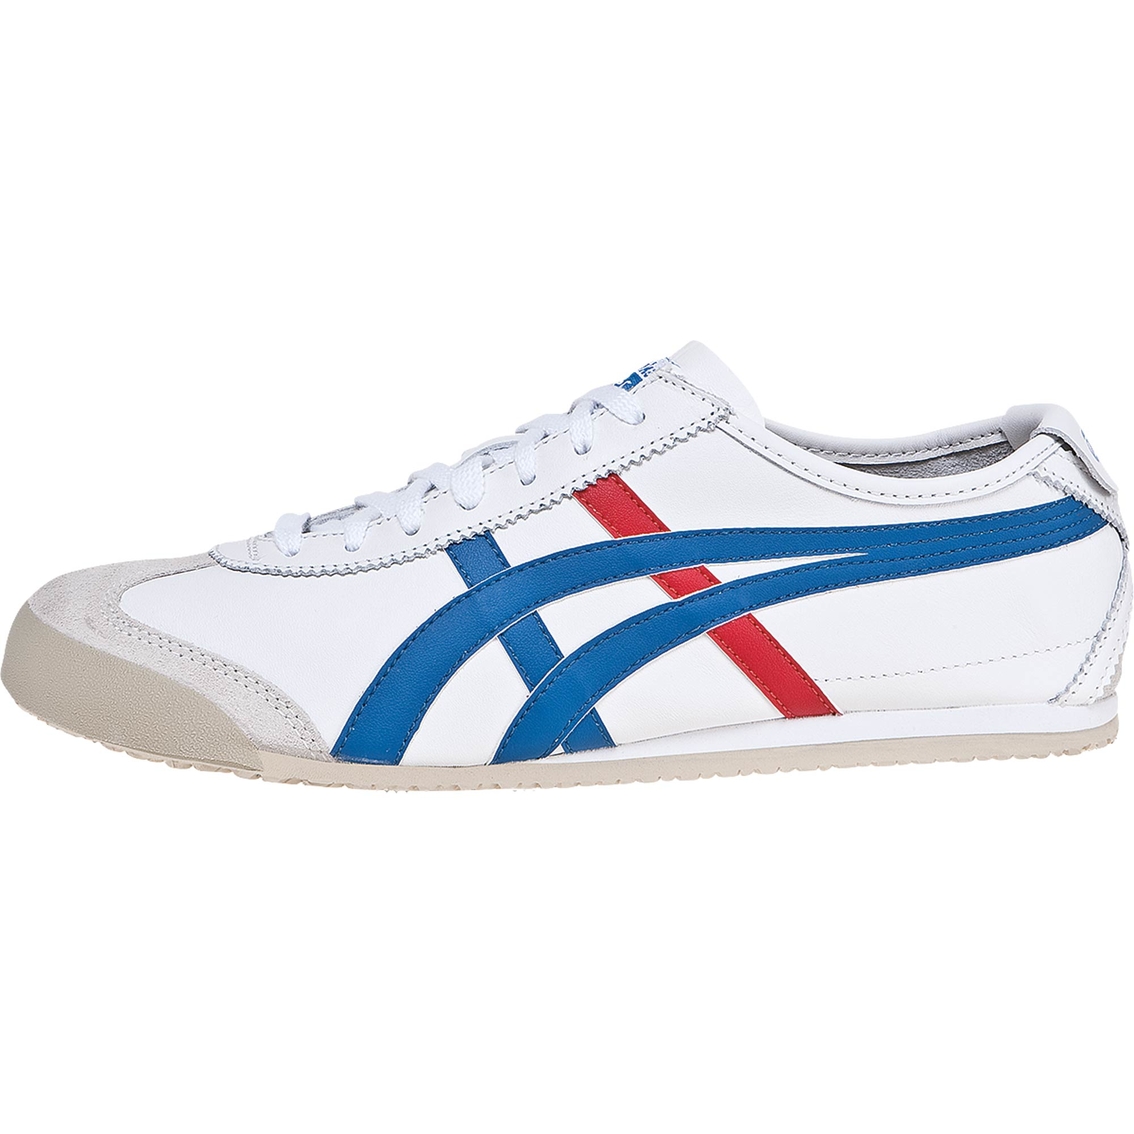 Buy > asics mexico 66 sneakers > in stock